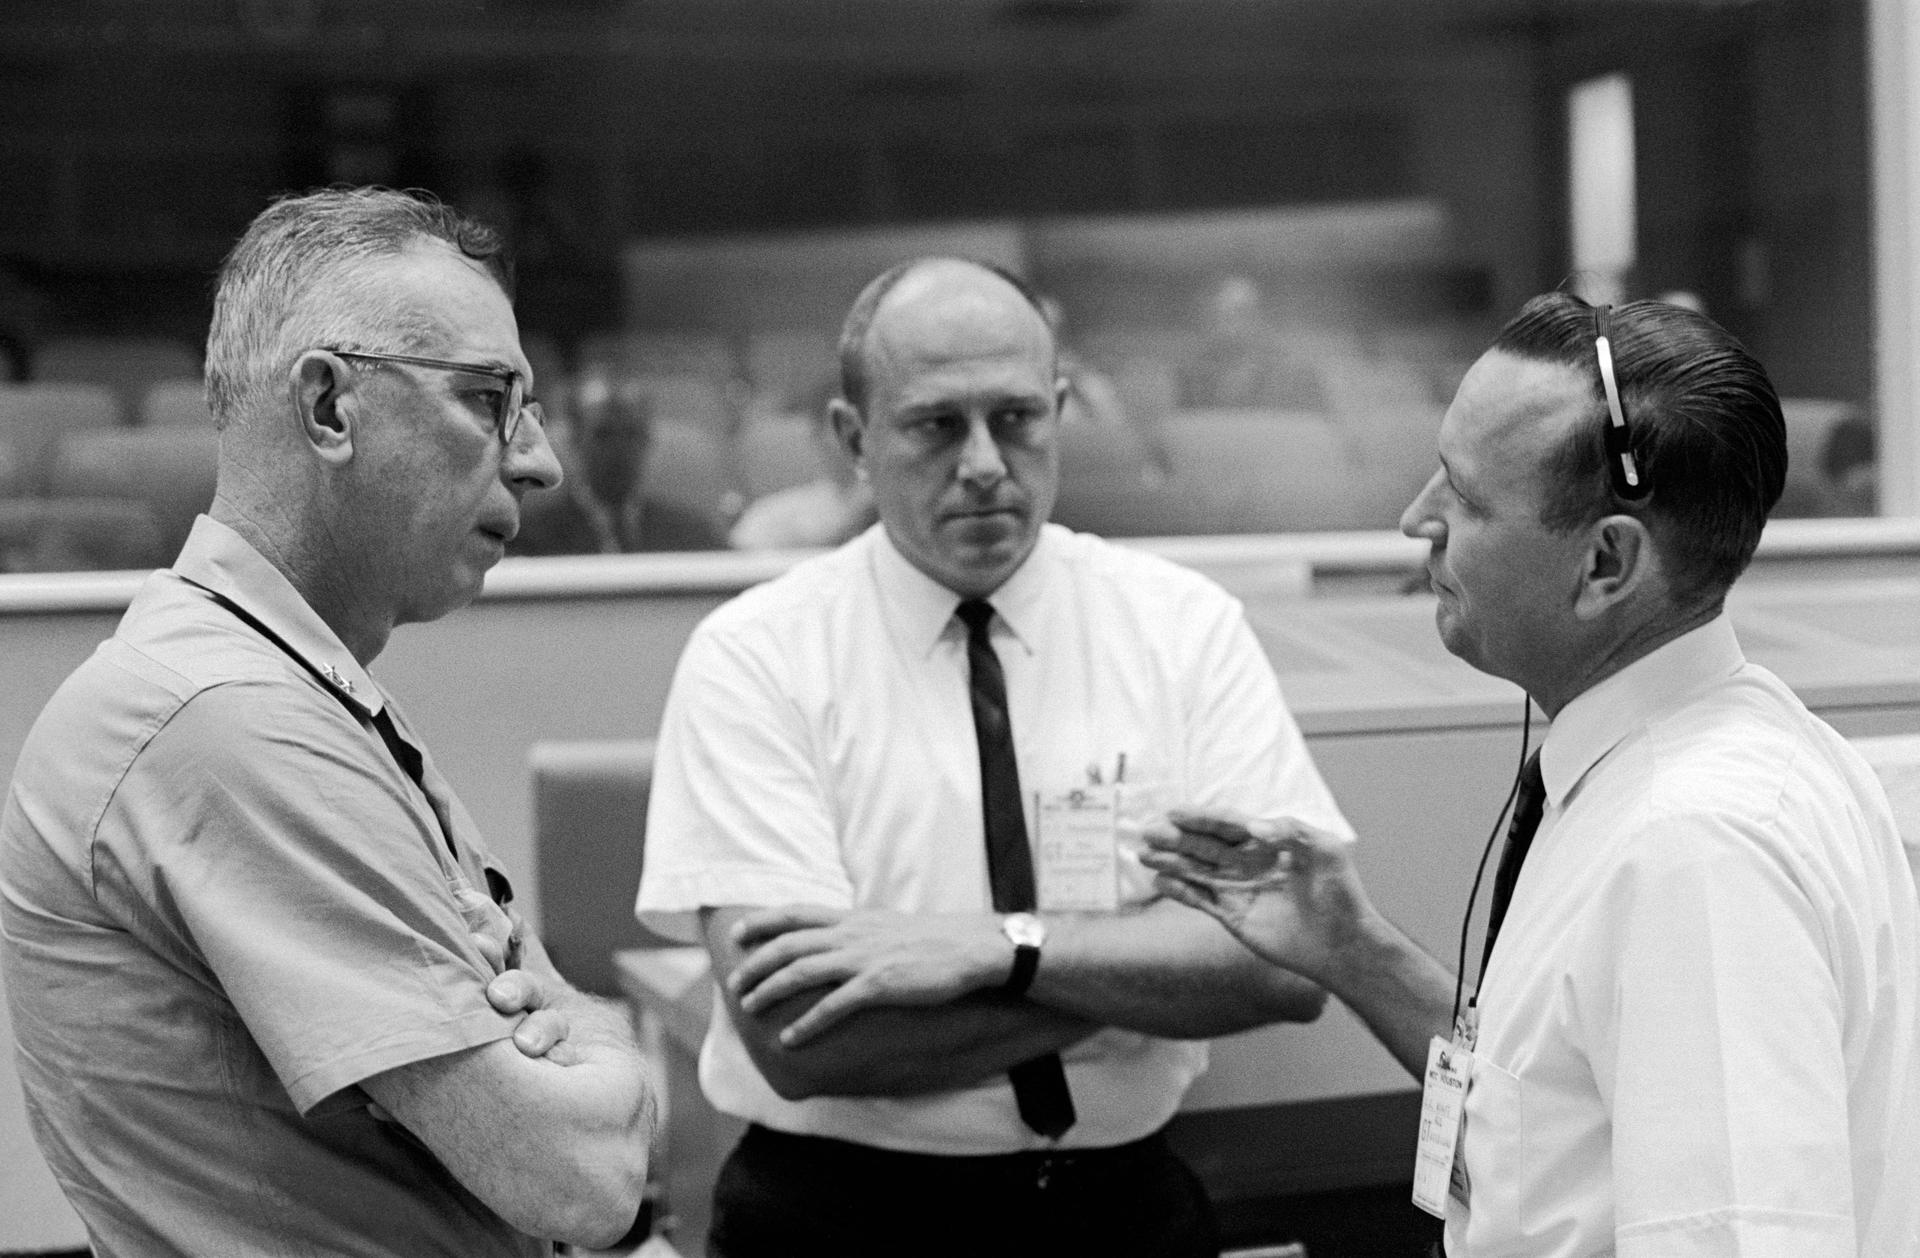 In 1965, Rear Admiral W.C. Abhau (left), is shown in the Mission Control Center with Bob Thompson (center) and Chris Kraft, flight director for Gemini-5.